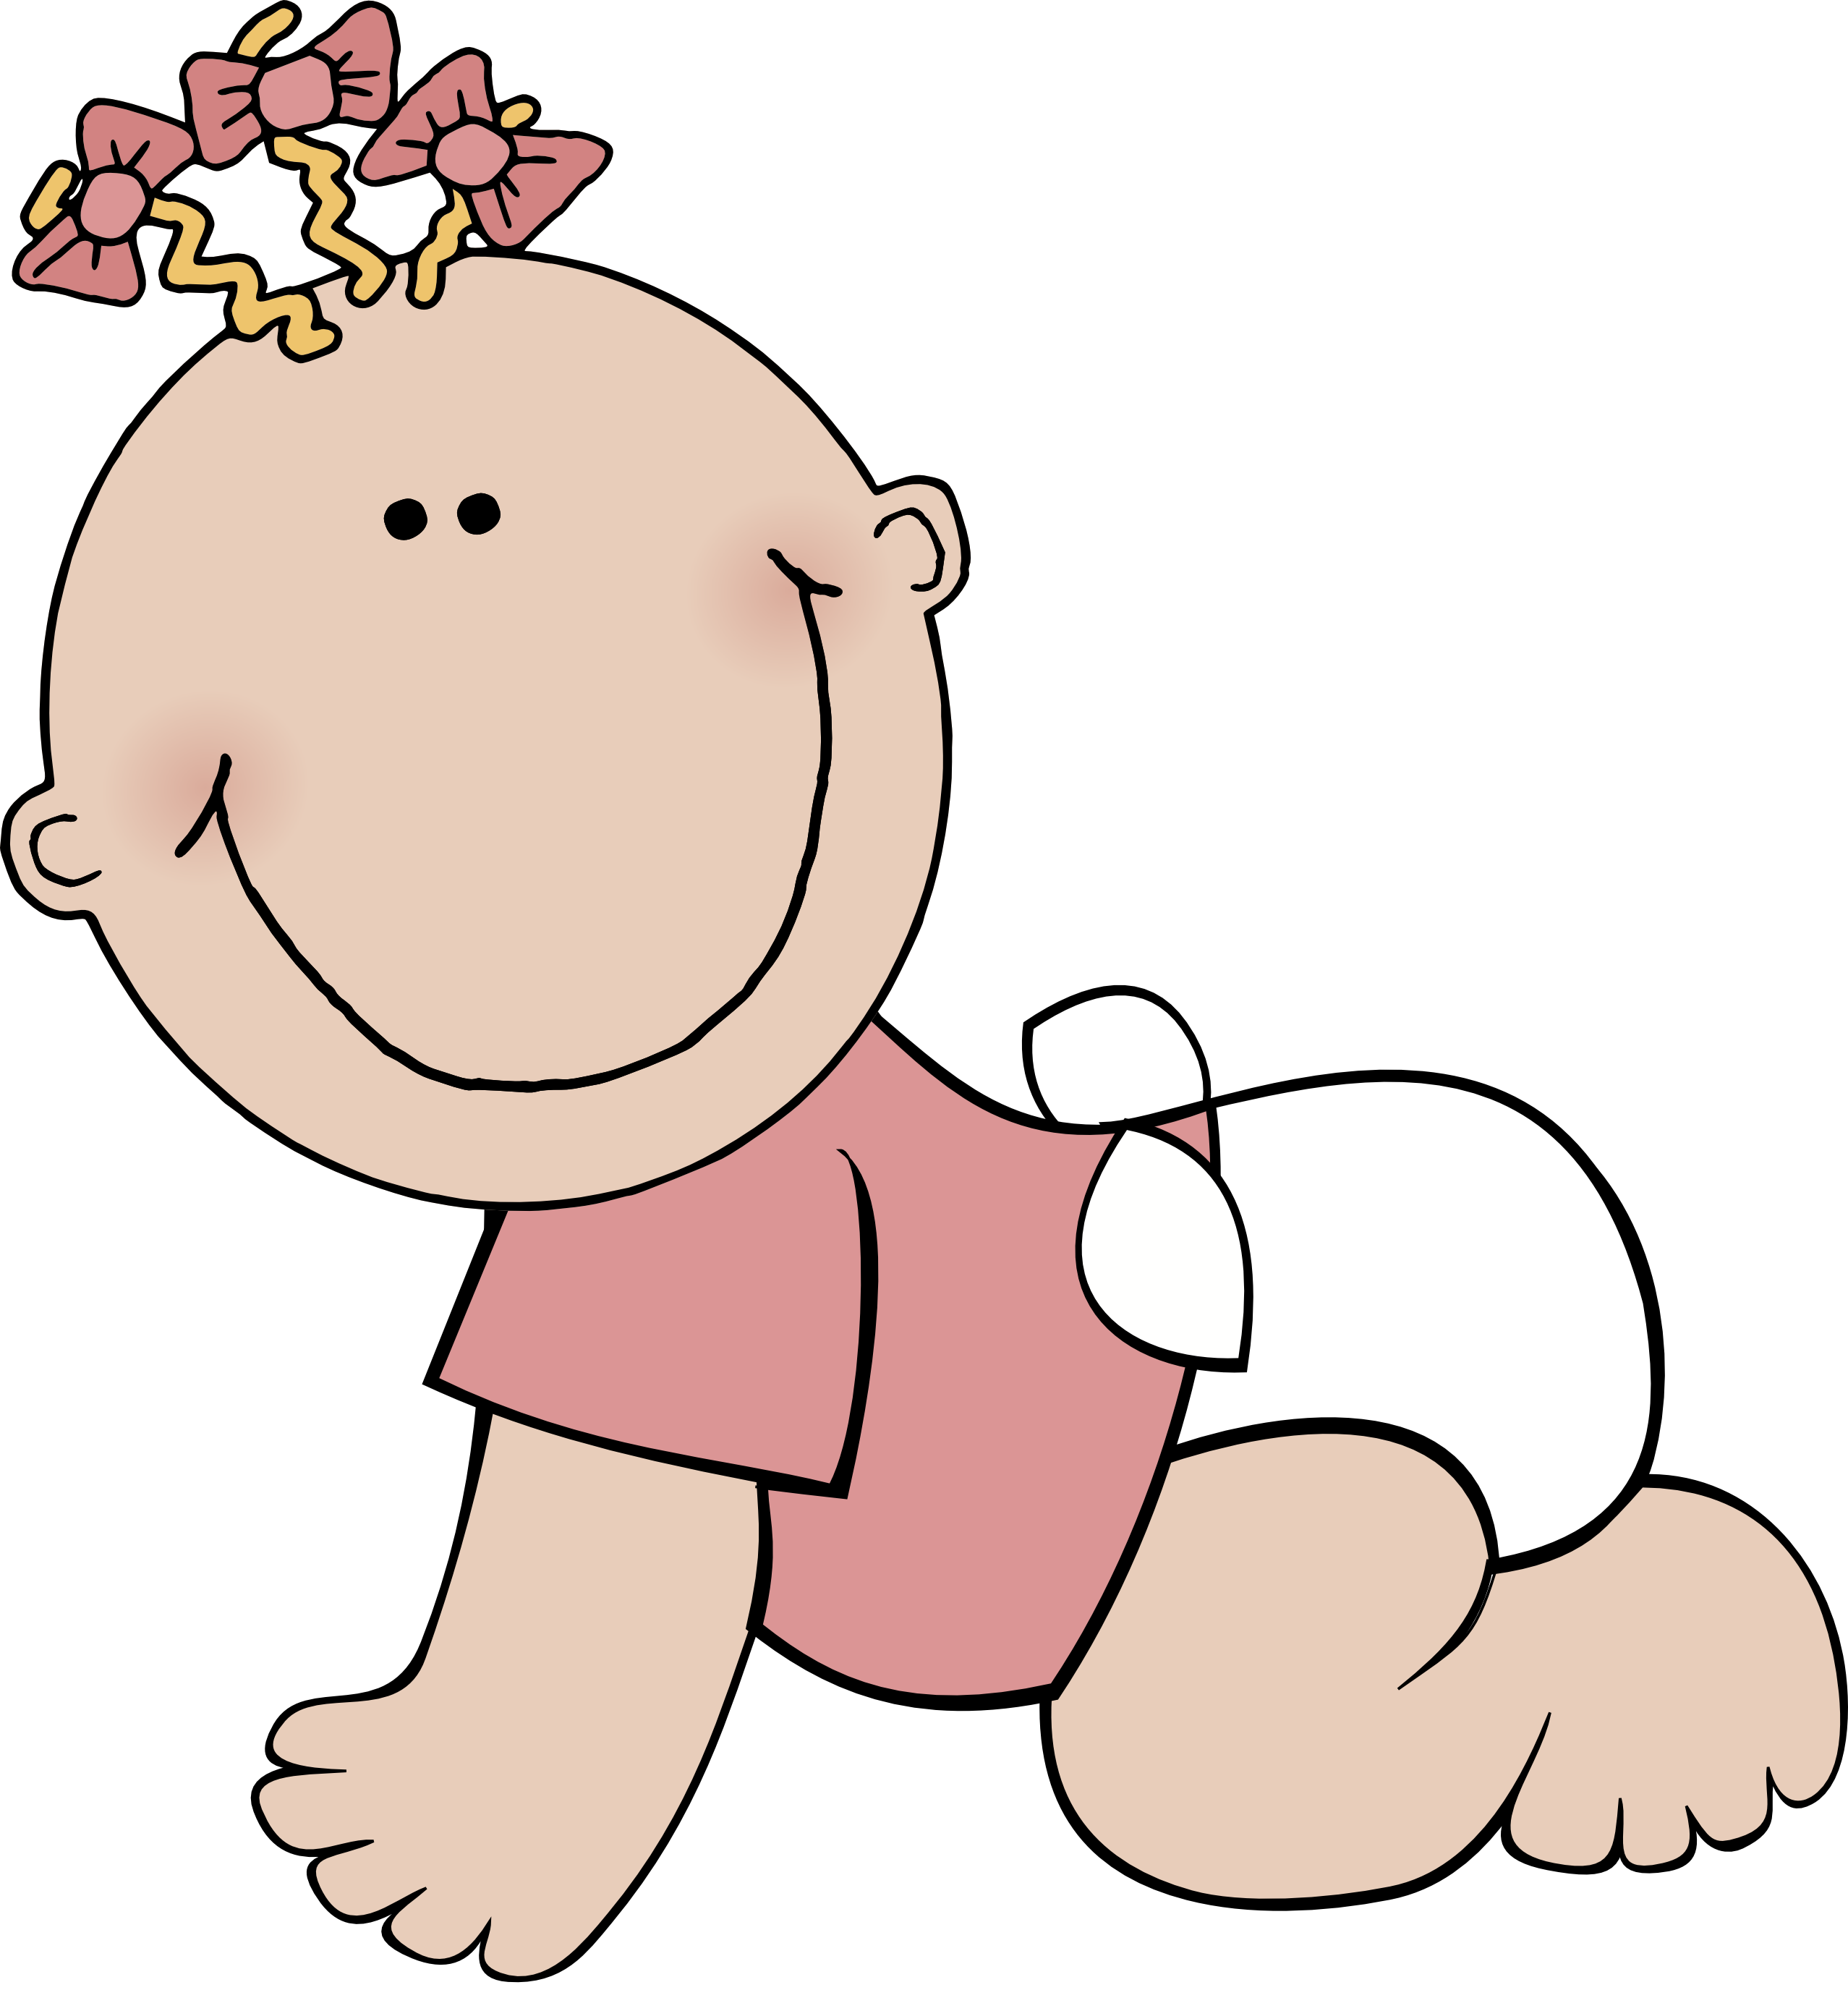 Clip art baby clipart free cl - Clipart Of Baby